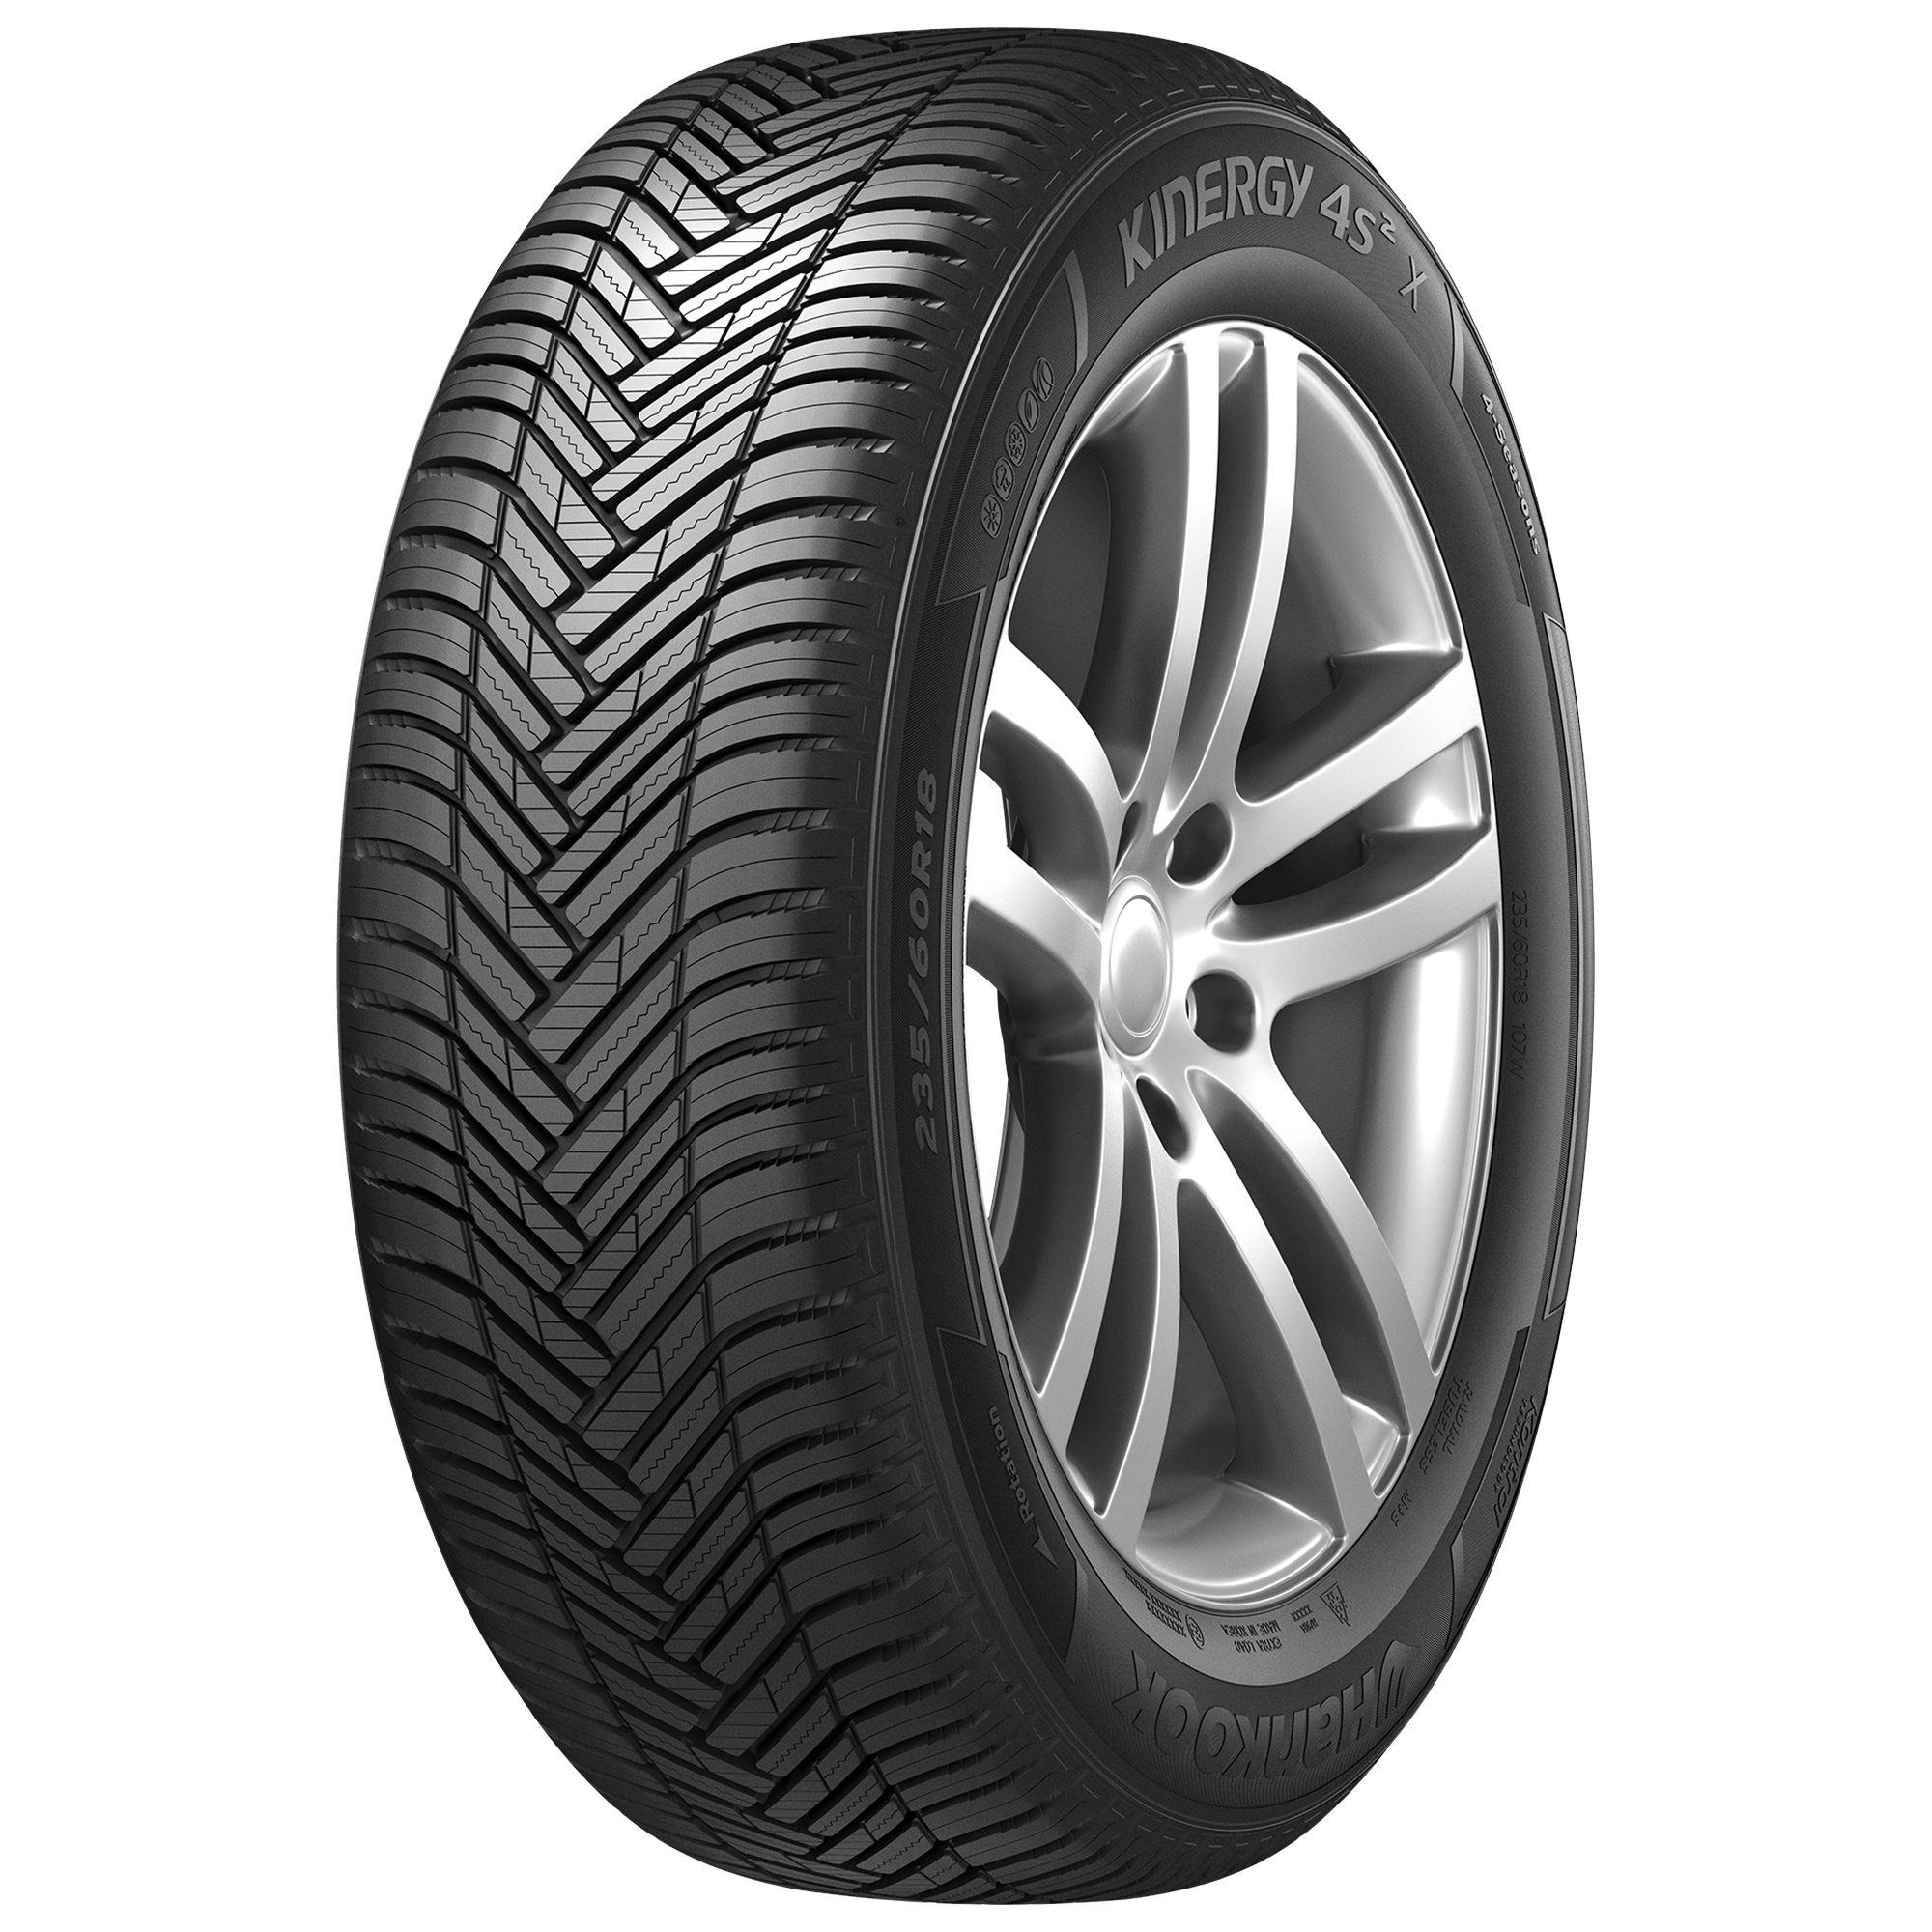 HANKOOK KINERGY 4S 2 X (H750A) 225/60R17 99H BSW